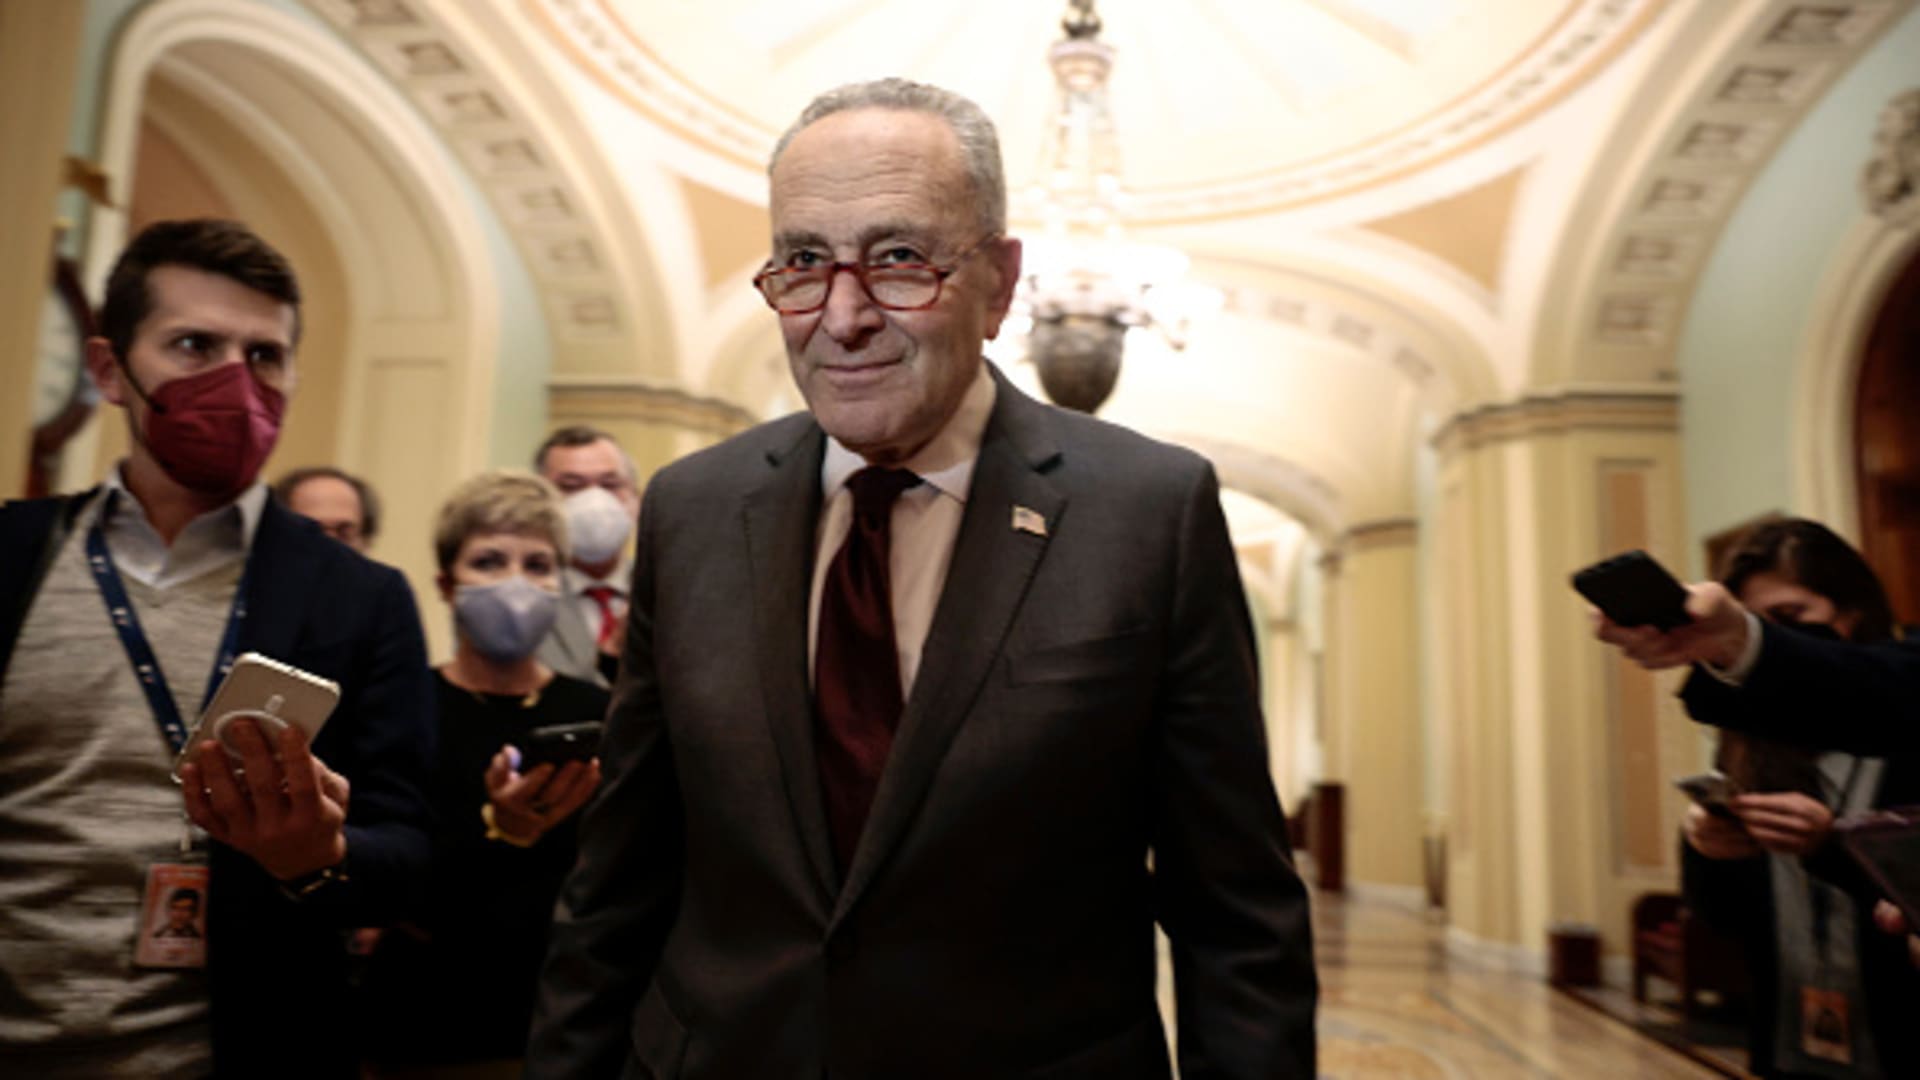 WASHINGTON, DC - DECEMBER 07: U.S. Senate Majority Leader Chuck Schumer (D-NY) walks away from reporters after speaking with them outside the Senate Chambers of the Capitol on December 07, 2021 in Washington, DC. Schumer updated reporters on an agreement being made with Senate Republicans to pass legislation to lift the debt ceiling.